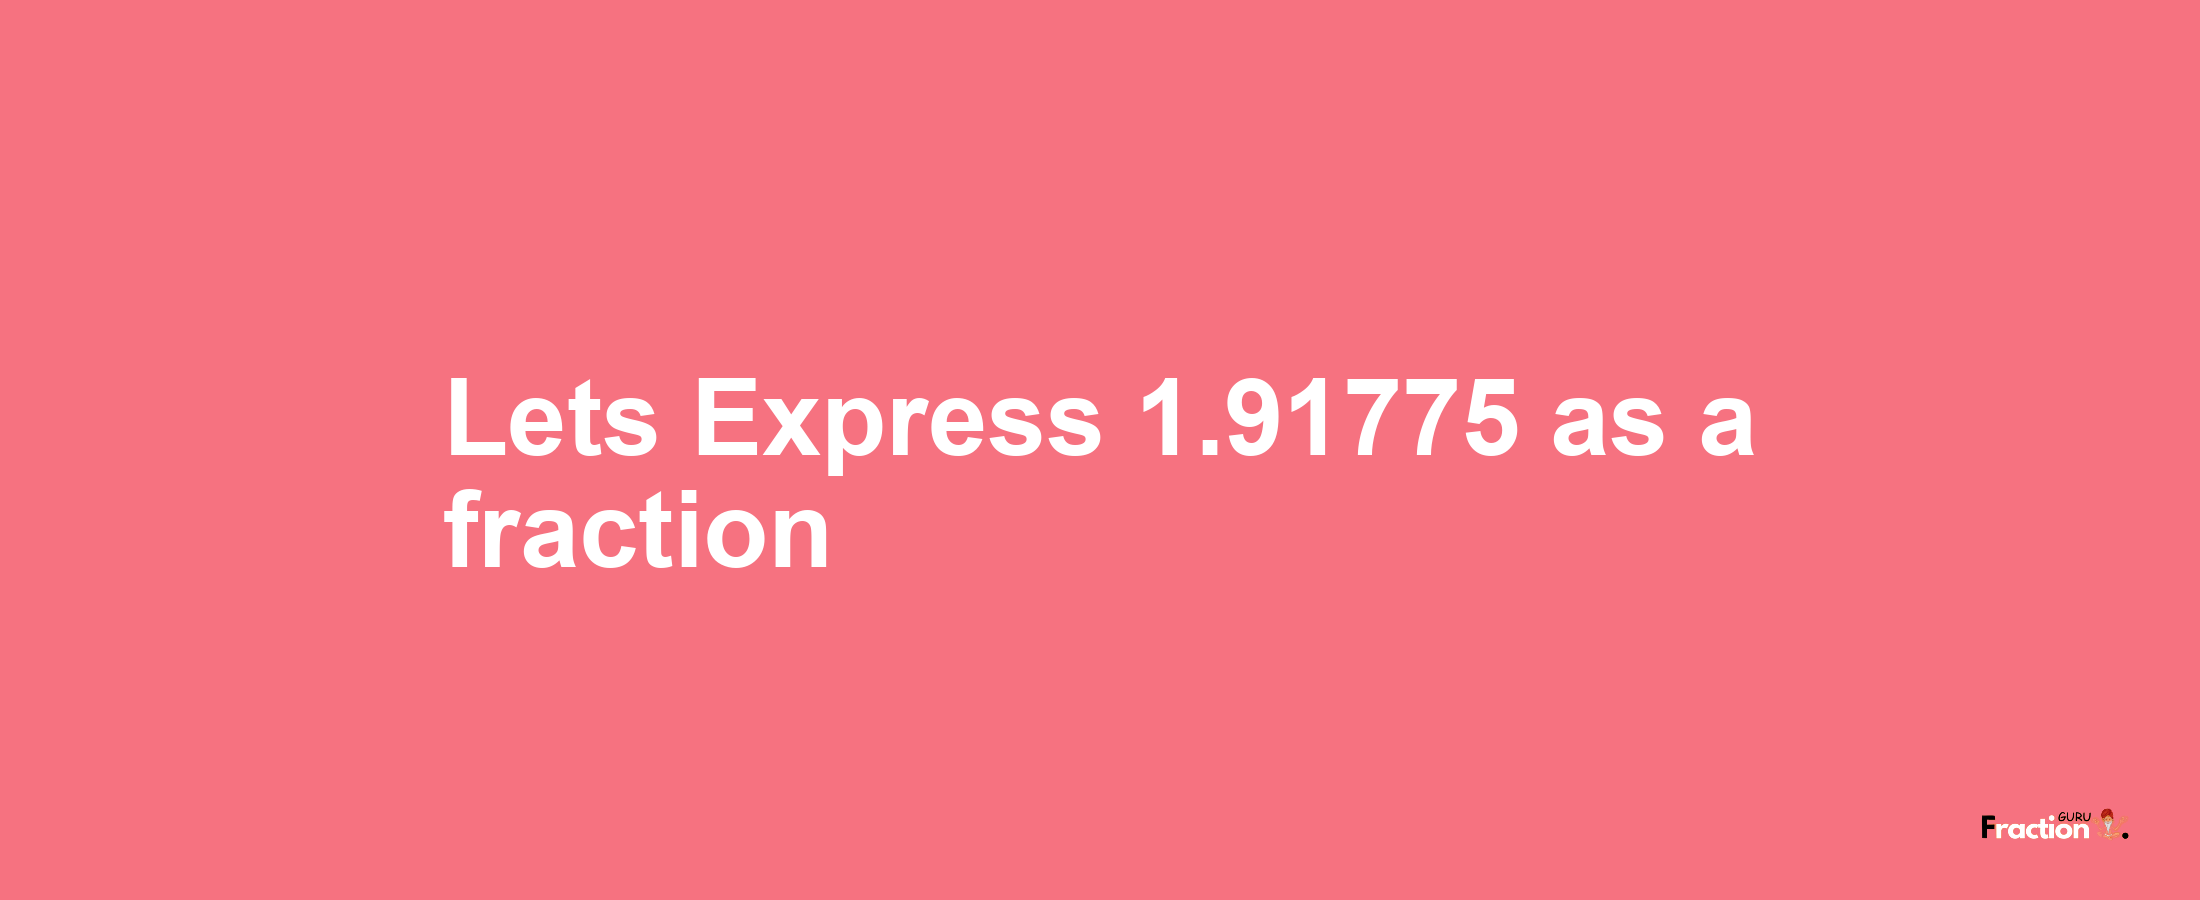 Lets Express 1.91775 as afraction